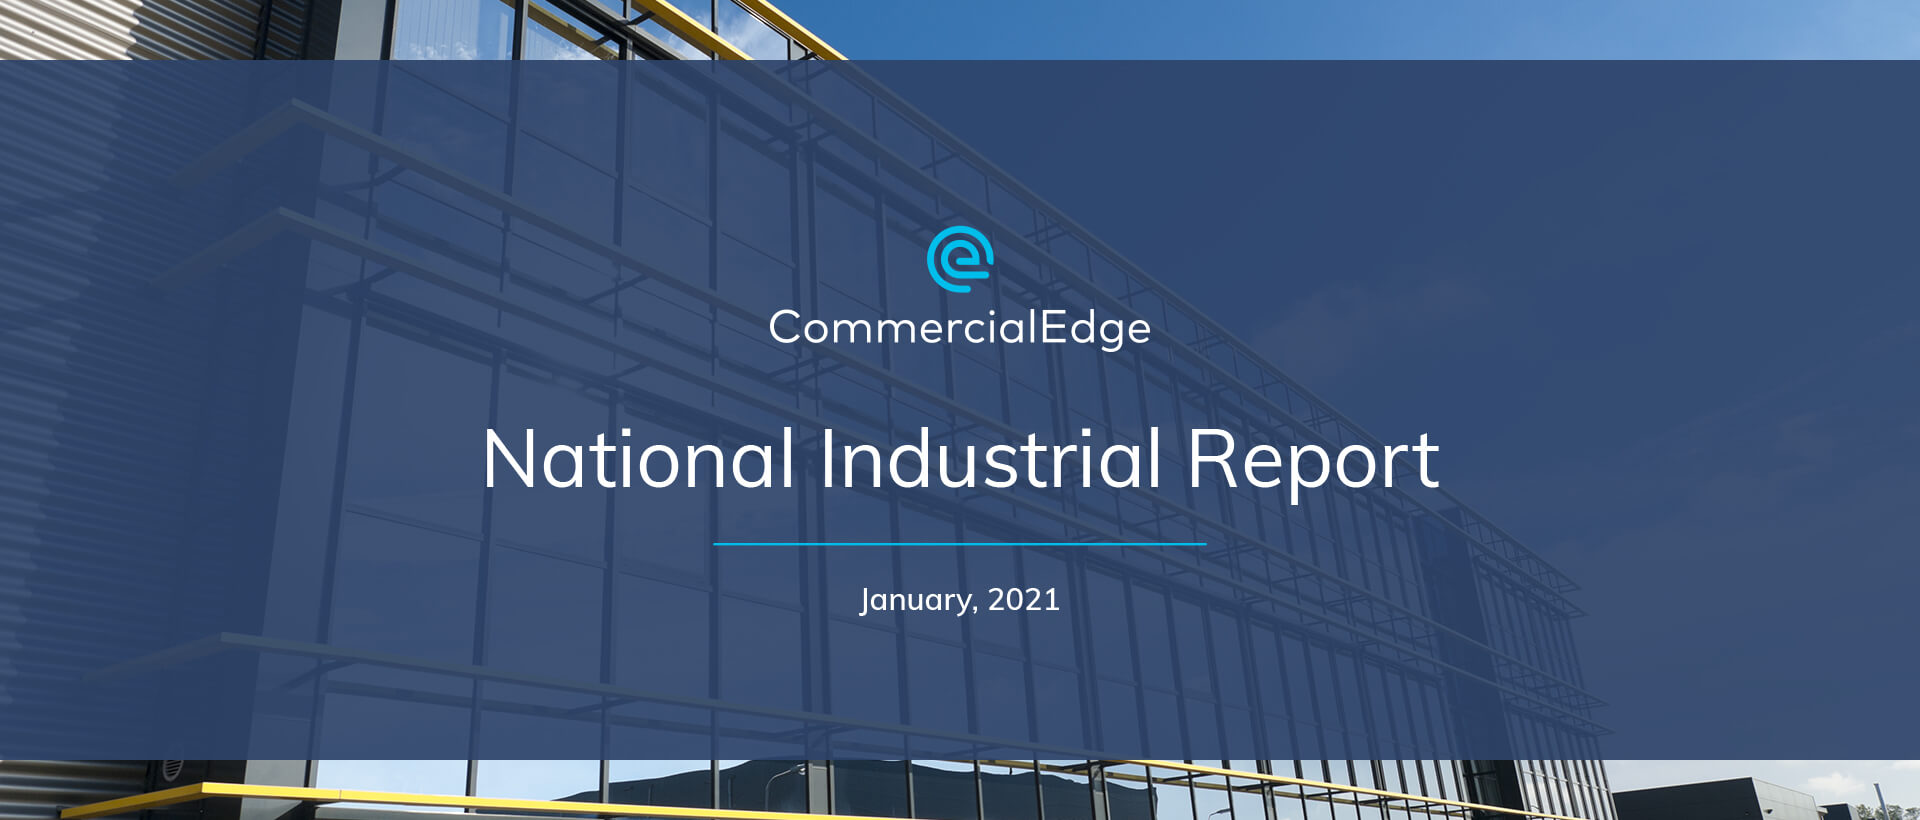 CommercialEdge National Industrial Report January 2021